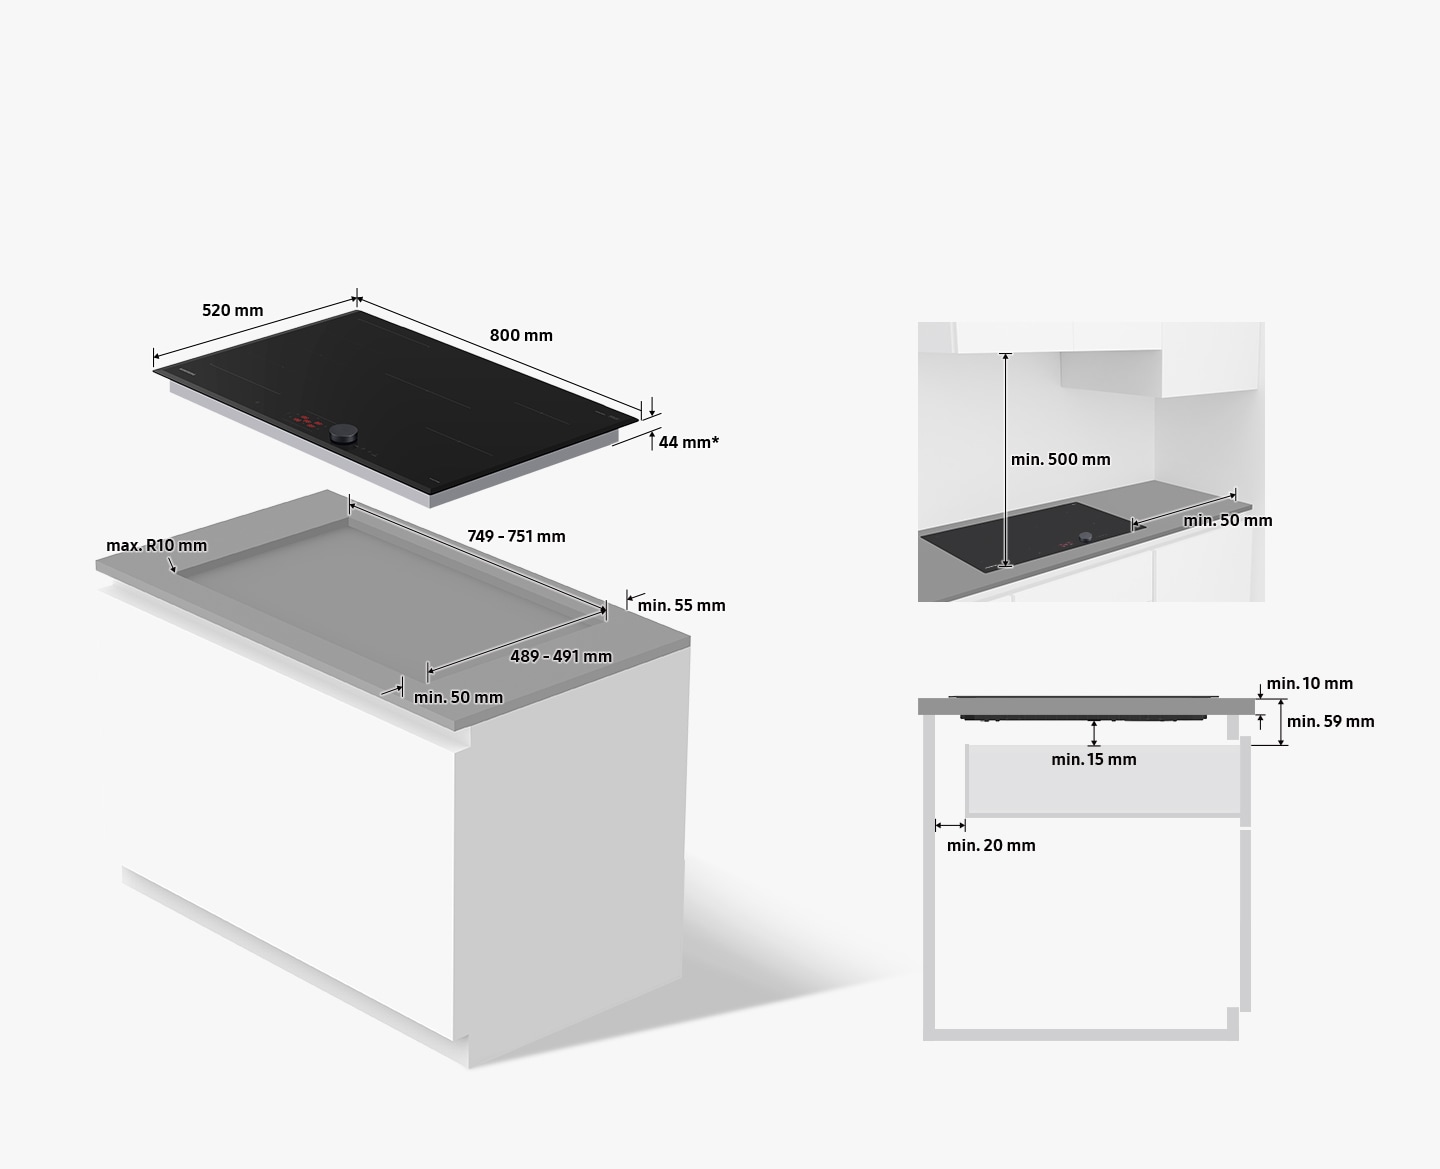 The cooktop measures 800mm wide, 520mm deep, and 44mm* high. The 44mm height must fit inside the countertop cutout. Countertop cutouts must be 749-751mm wide, 489-491mm deep, and less than R10mm round corners. There must be at least 55mm of uncut space on the back of the cutout and at least 50mm of uncut space on the front of the cutout. The minimum height of 15mm under the cooktop plus the minimum thickness of the countertop of 10mm must be at least 59mm. Drawers installed under the cooktop must be at least 20mm from the rear wall. When the cooktop is installed, there must be at least 500mm of space above the cooktop and at least 50mm to the right of the cooktop.